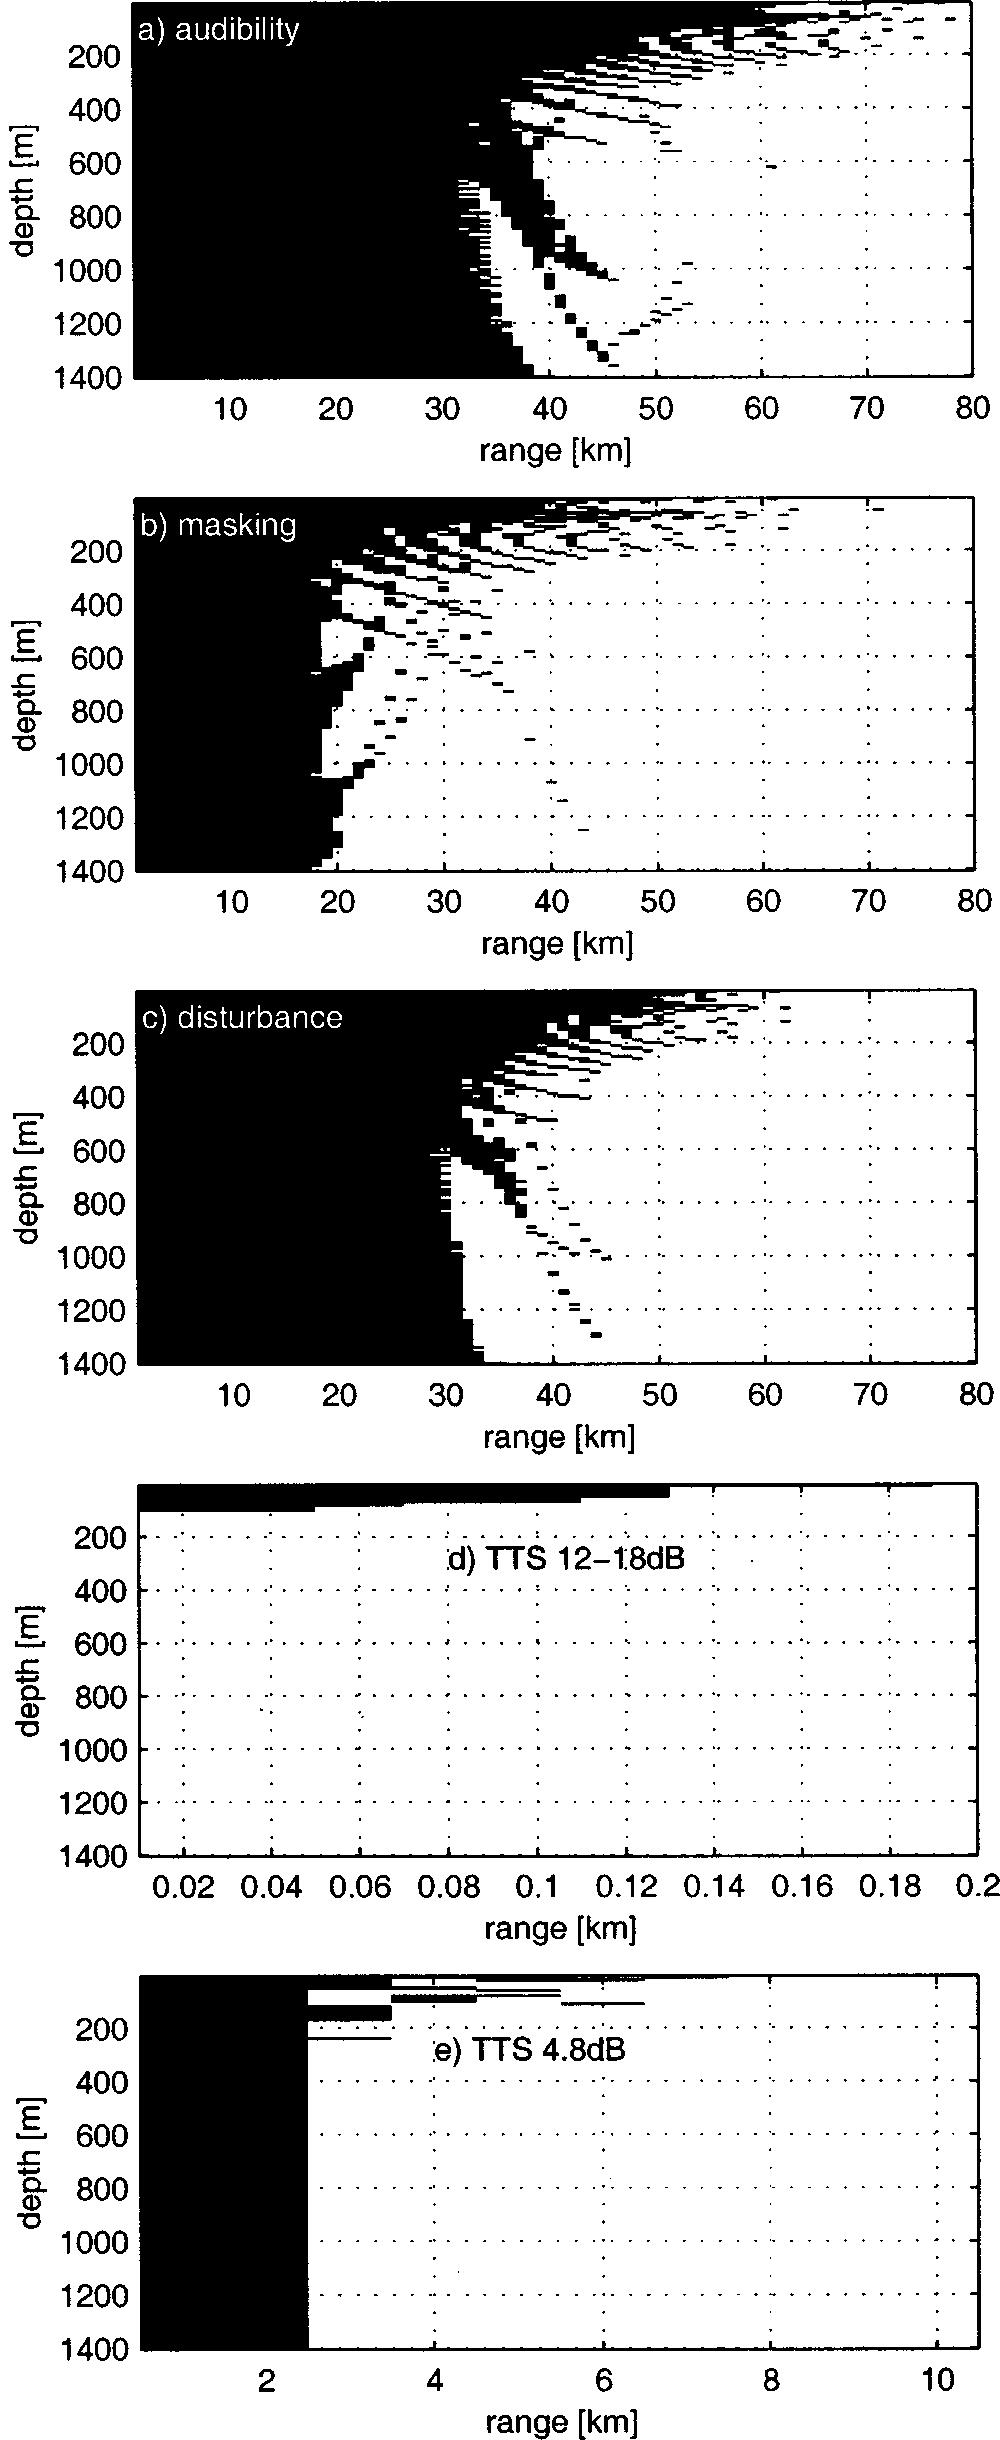 FIG. 13. Zones of impact around ramming noise for T2. Note the different range scale in d and e. noises, median spectra as well as 25th, 75th, and 95th percentiles were given.